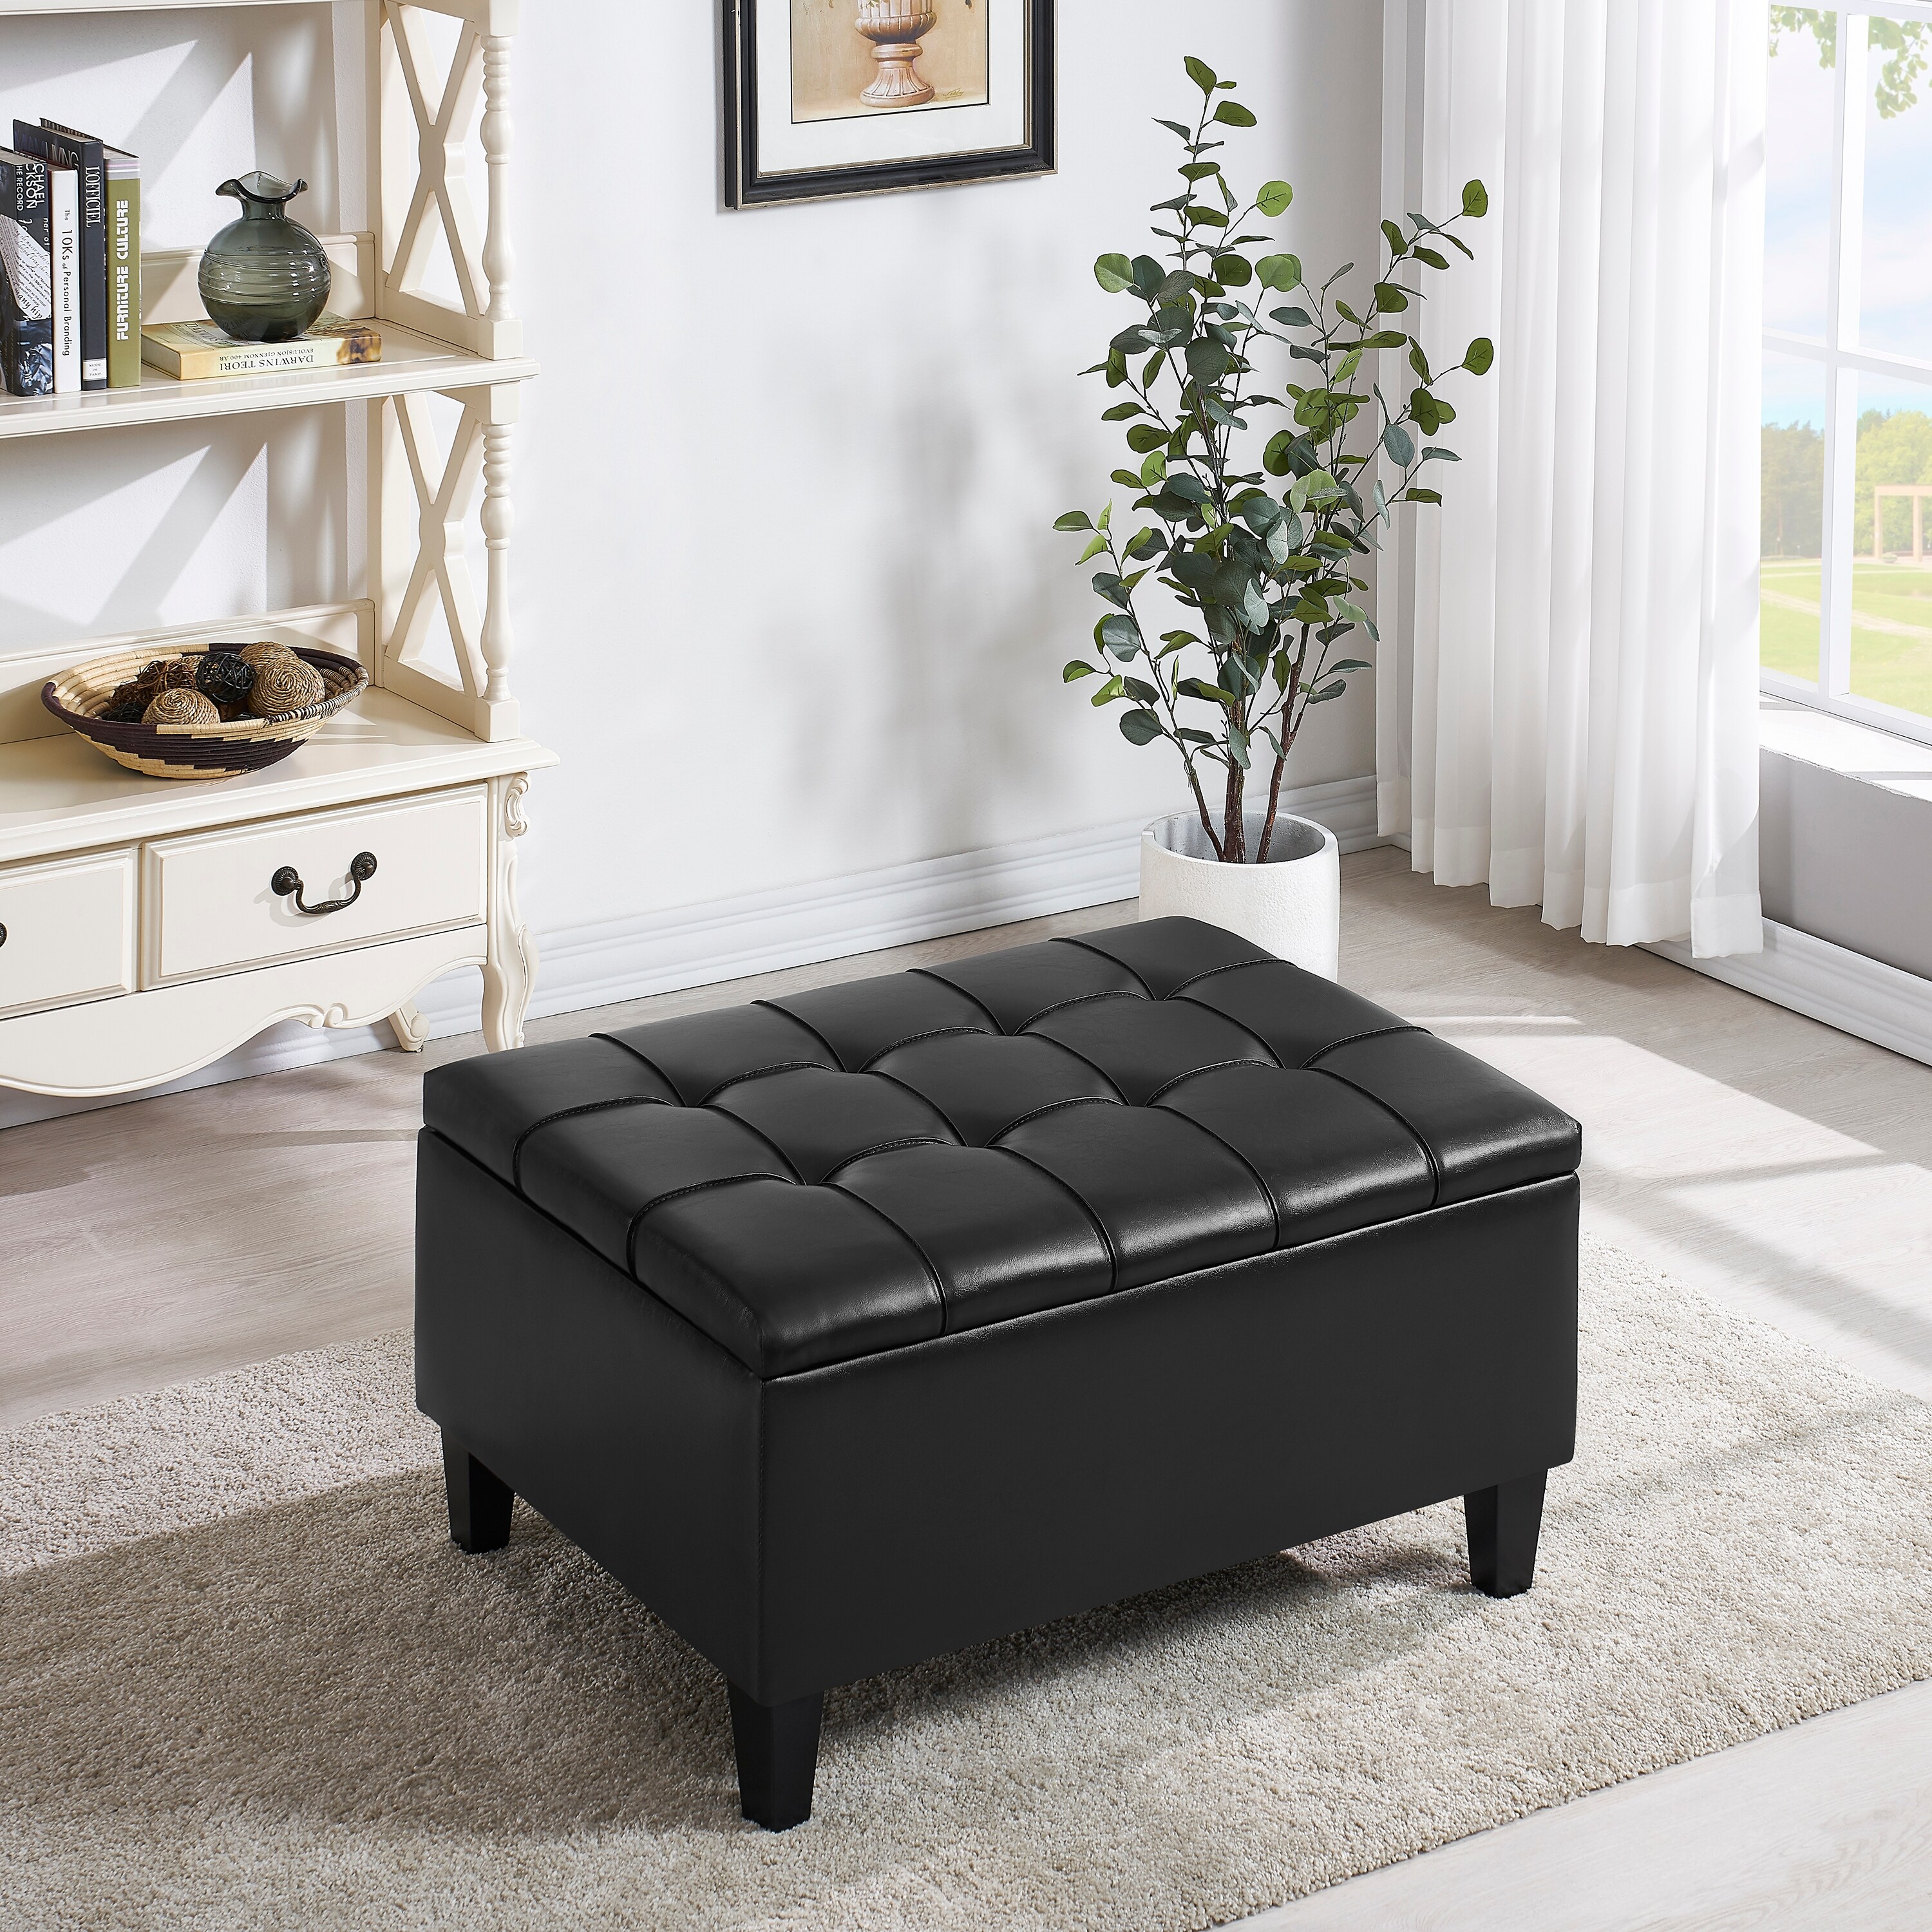 https://ak1.ostkcdn.com/images/products/is/images/direct/85a7fa748fd32283c6b1ece55701443032cab98f/Multipurpose-Upholstery-Storage-Foot-Rest-Sofa-Stool%2C-Black.jpg